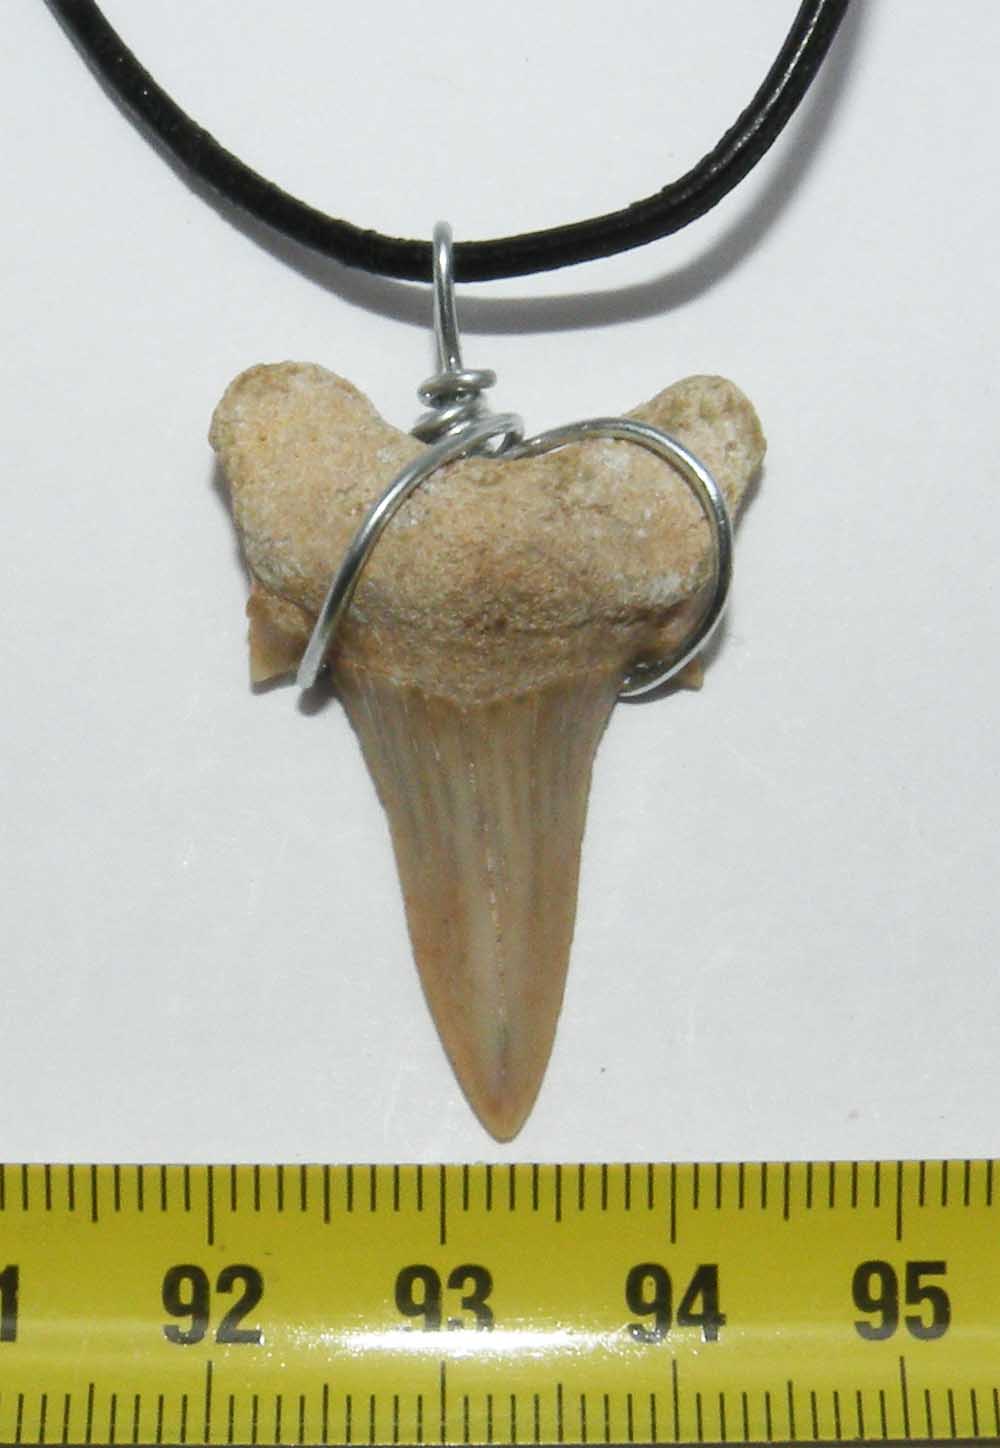 https://www.nuggetsfactory.com/EURO/megalodon/collier/4%20collier%20a.jpg